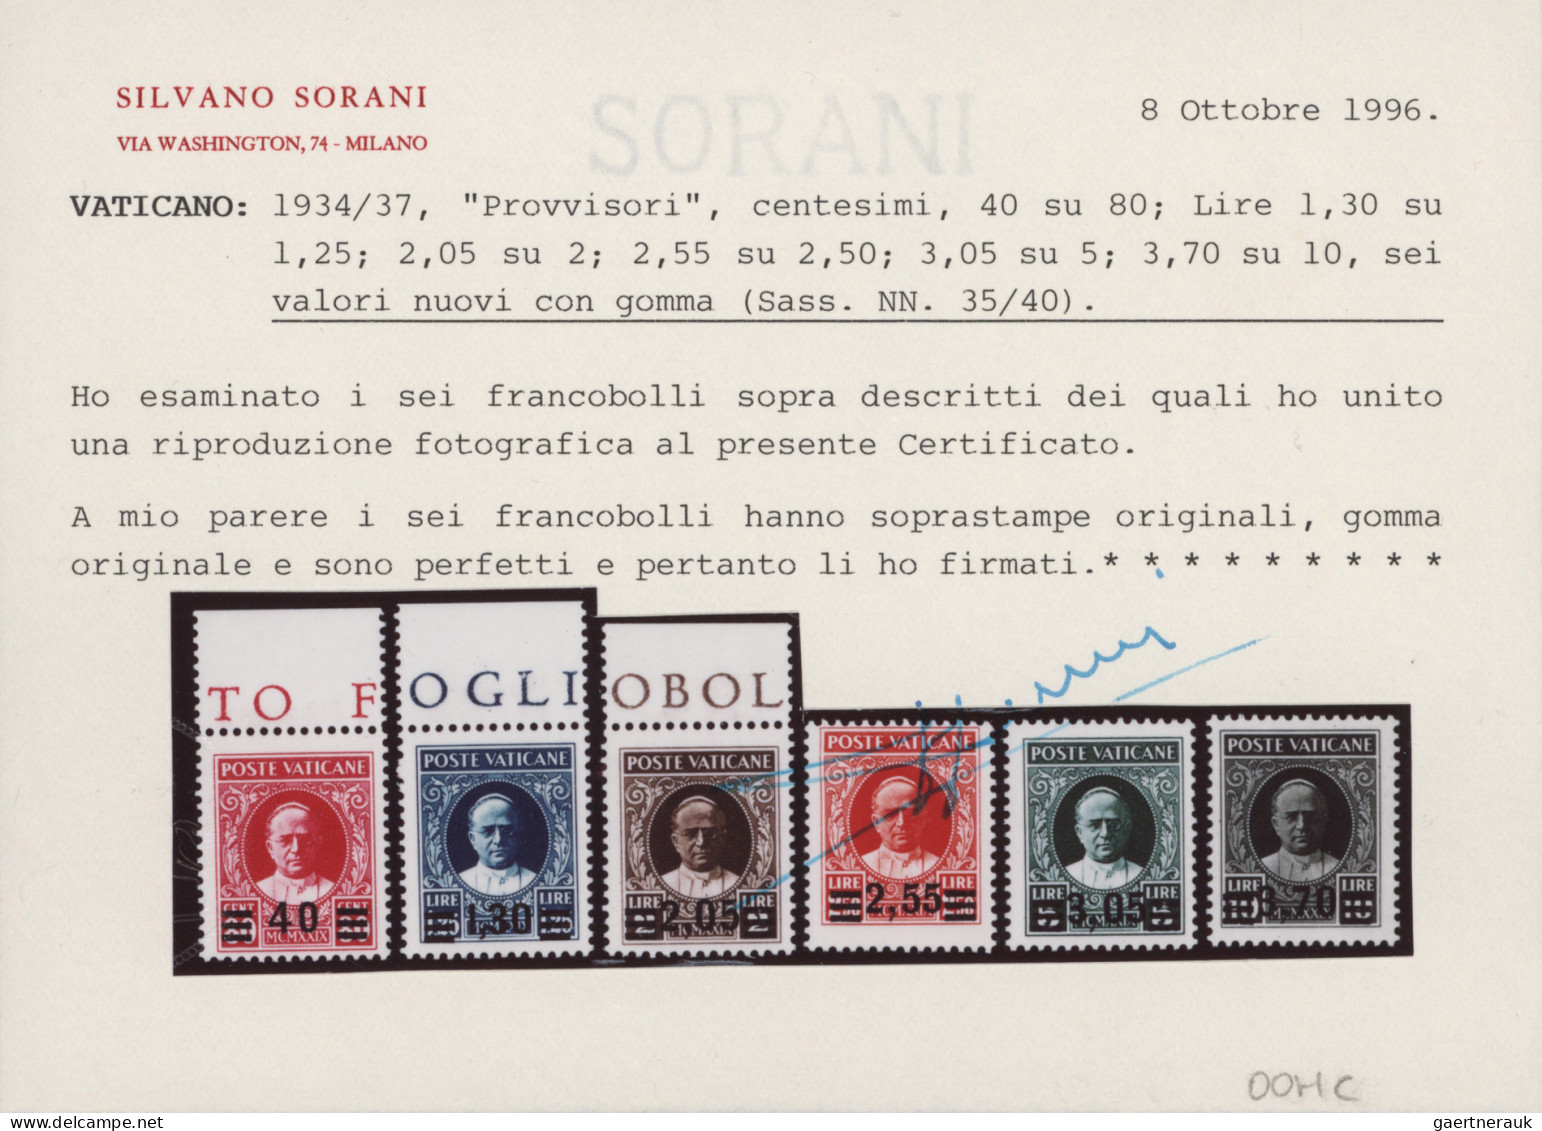 Vatican City: 1929-2000 Mint Collection On Printed Pages In Three Lindner-Dual-A - Sammlungen